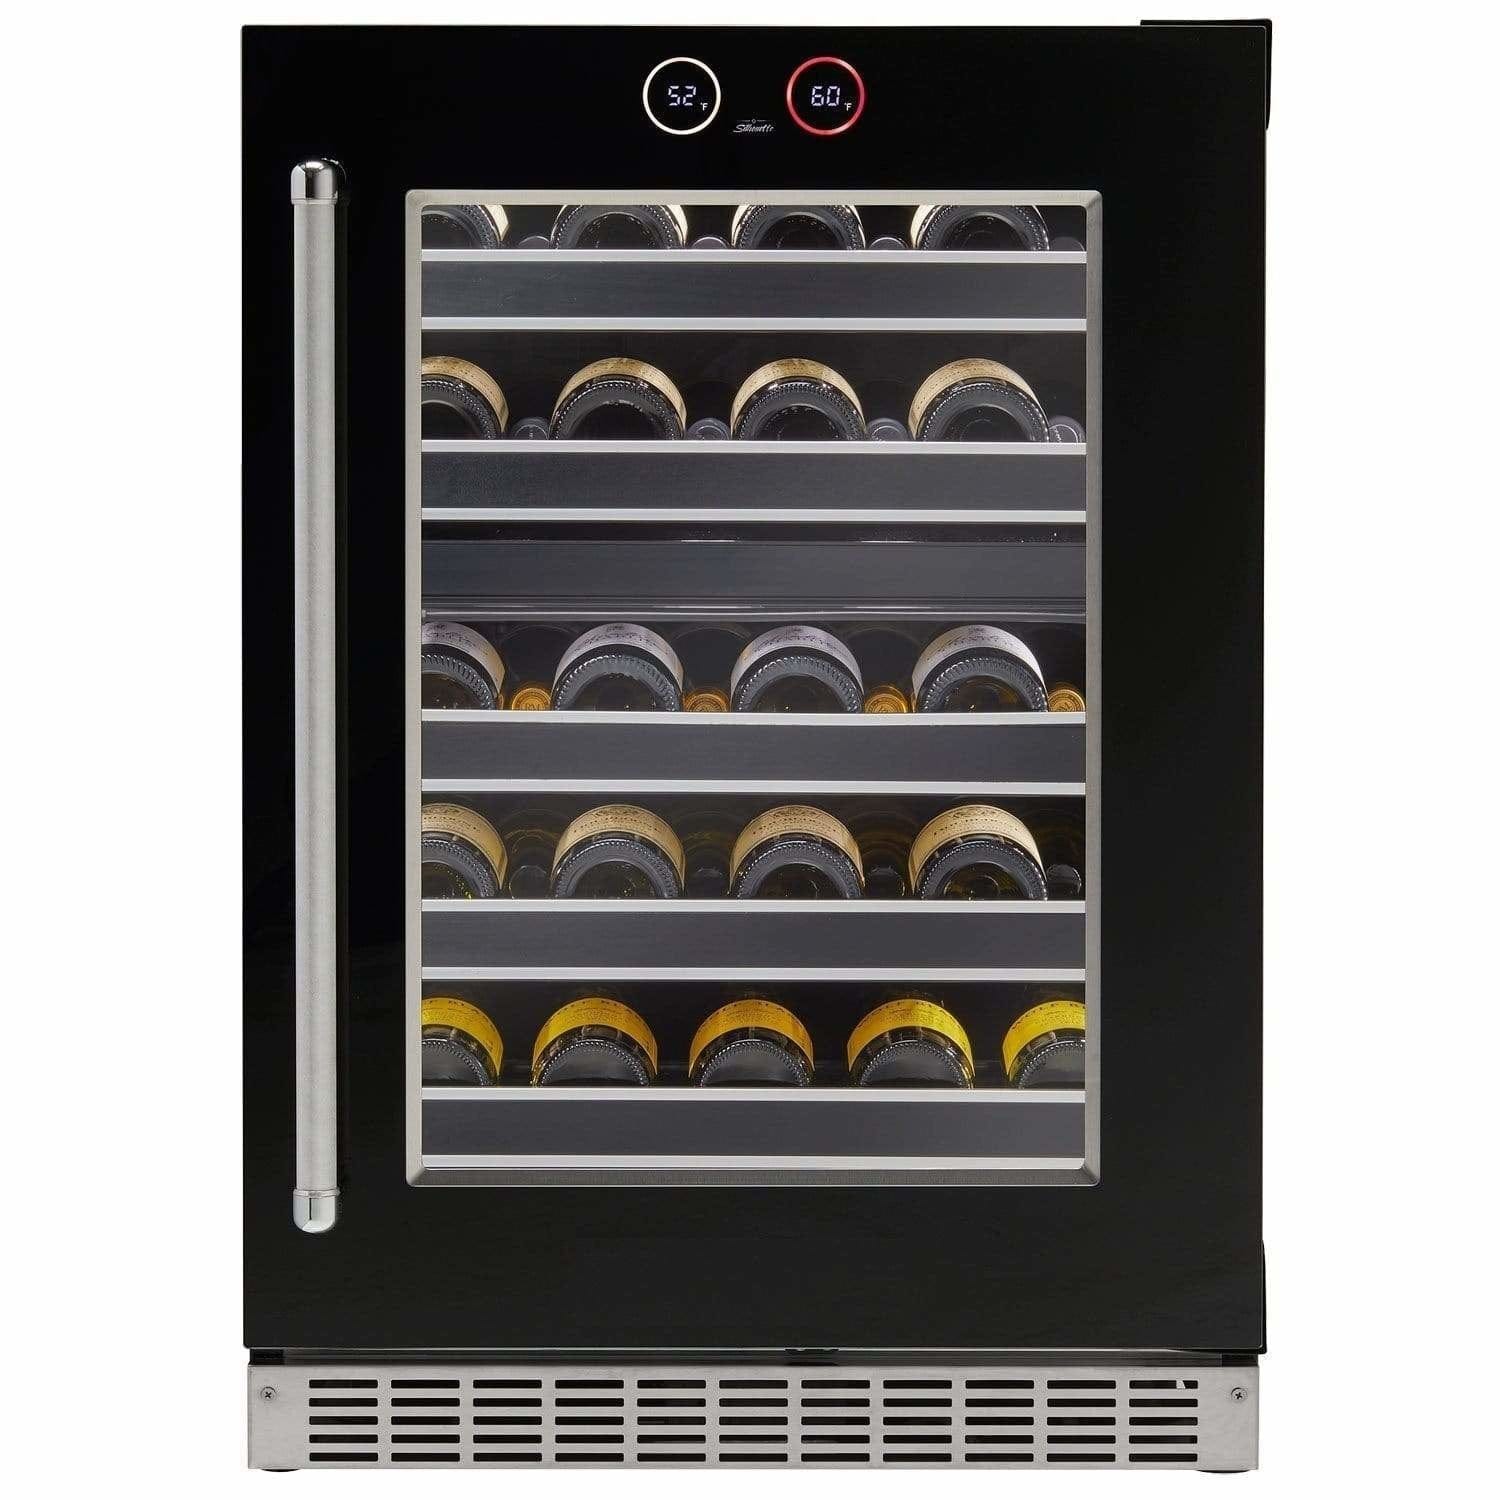 Danby Silhouette Reserve 24 Inch, 37 Bottle Capacity Dual Zone Wine Fridge SRVWC050 Wine Coolers Empire